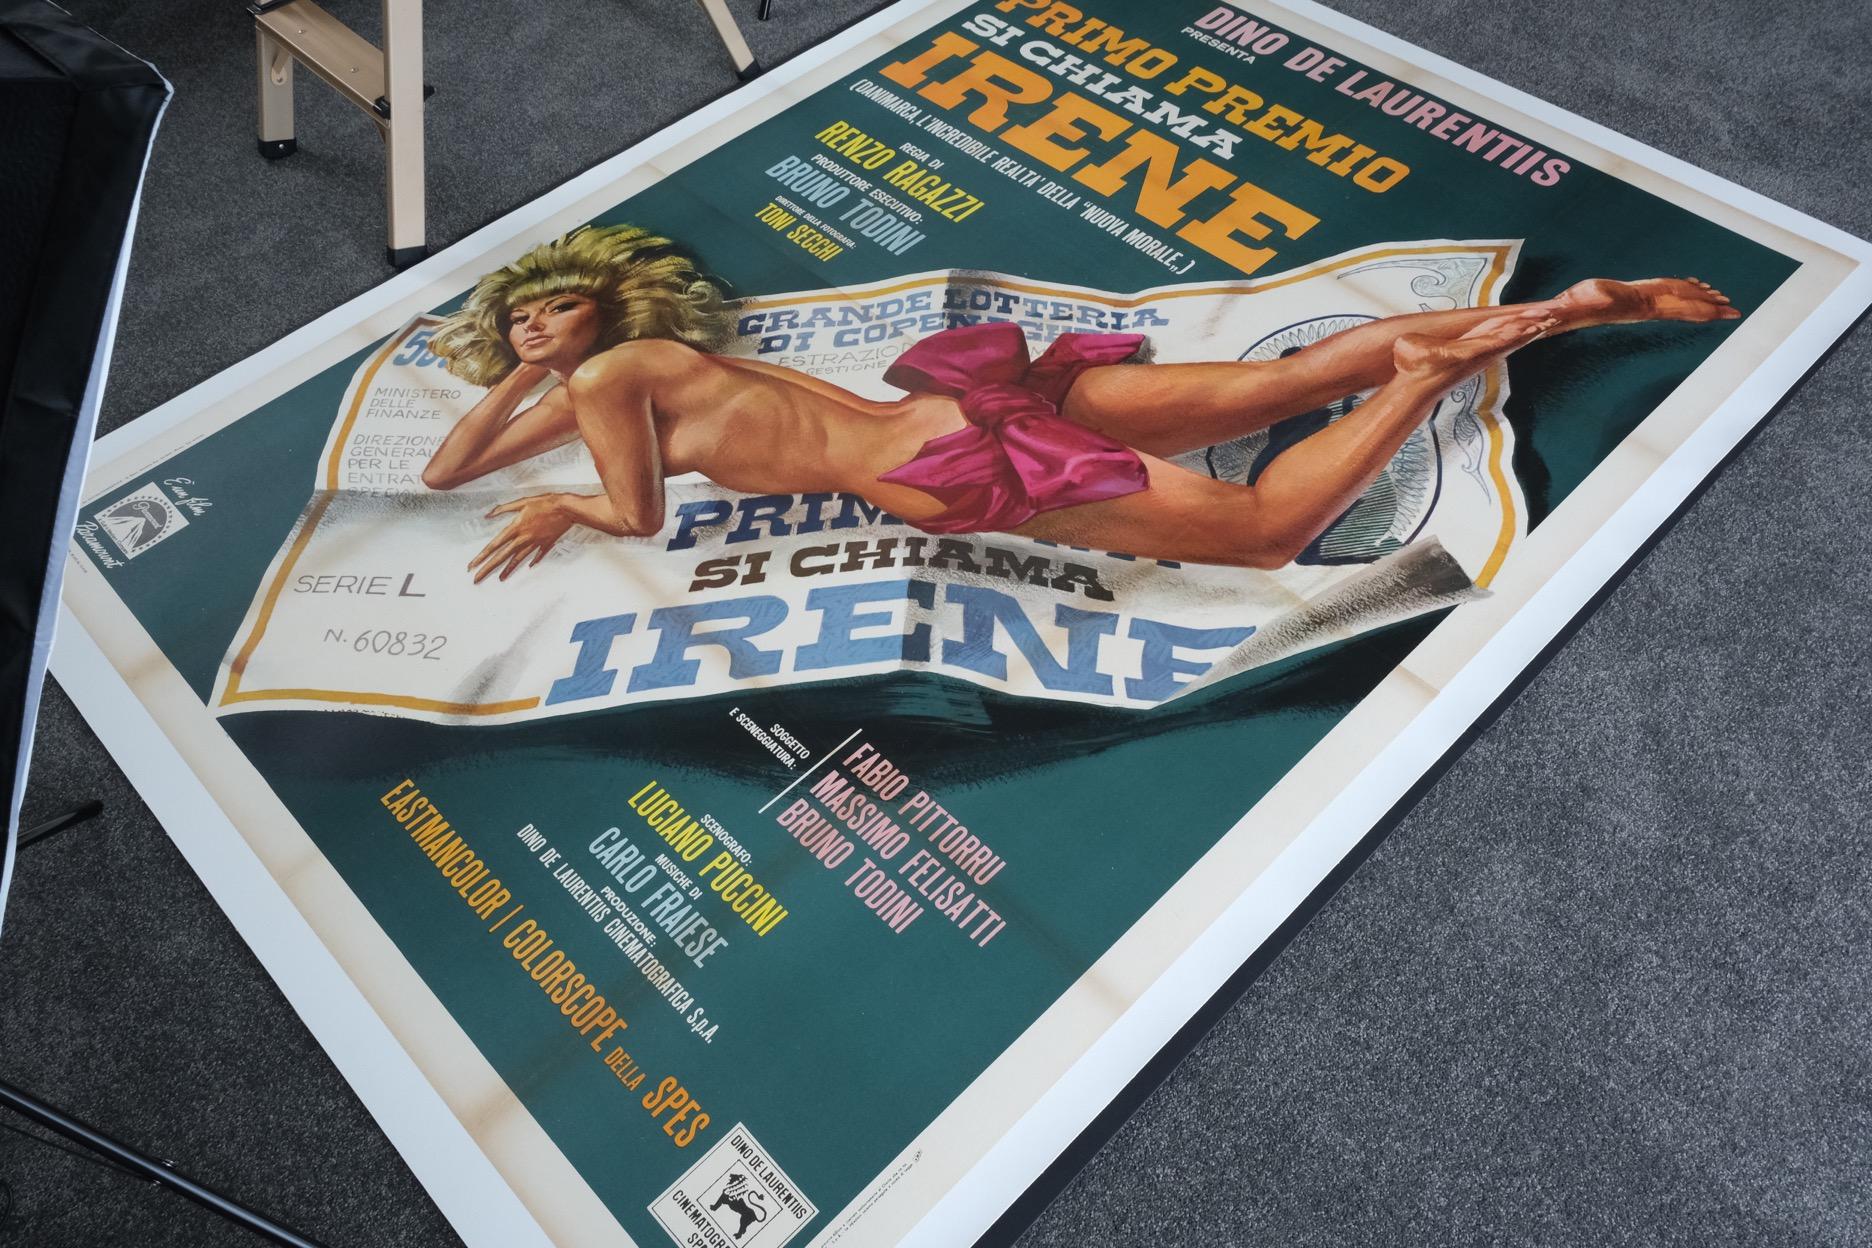 Size: Italian Four Sheet

Condition: Very Fine

Dimensions: 2080mm x 1475mm (inc. Linen Border)

Type: Original Lithographic Print - Linen Backed

Year: 1969

Details: A very rare and one of the few remaining original posters produced for